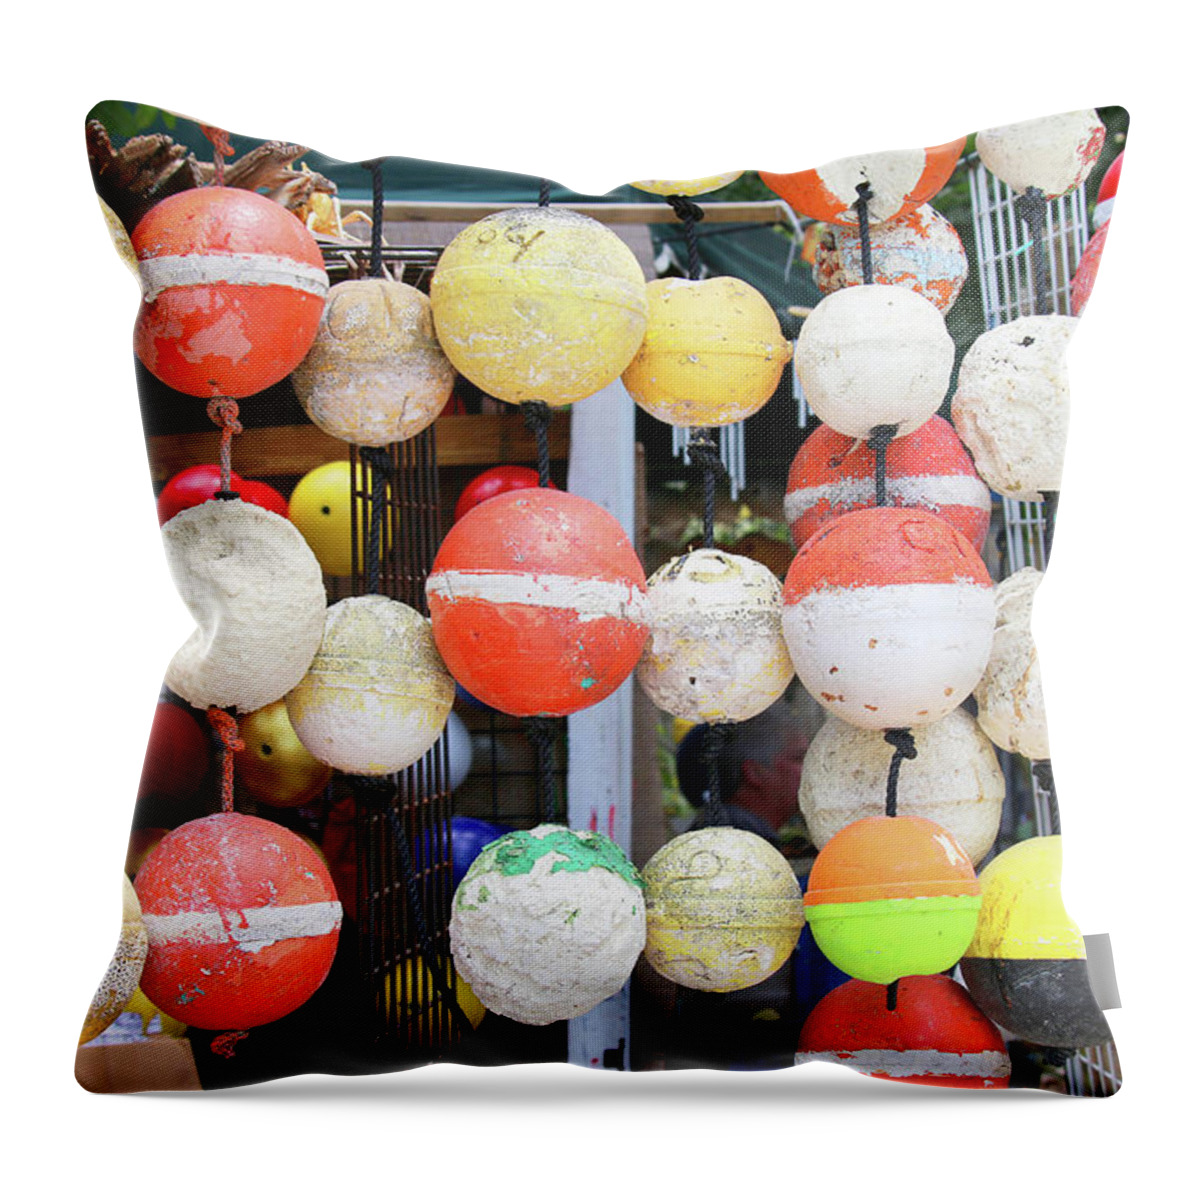 Key Largo Throw Pillow featuring the photograph Old Styrofoam Floats by Art Block Collections